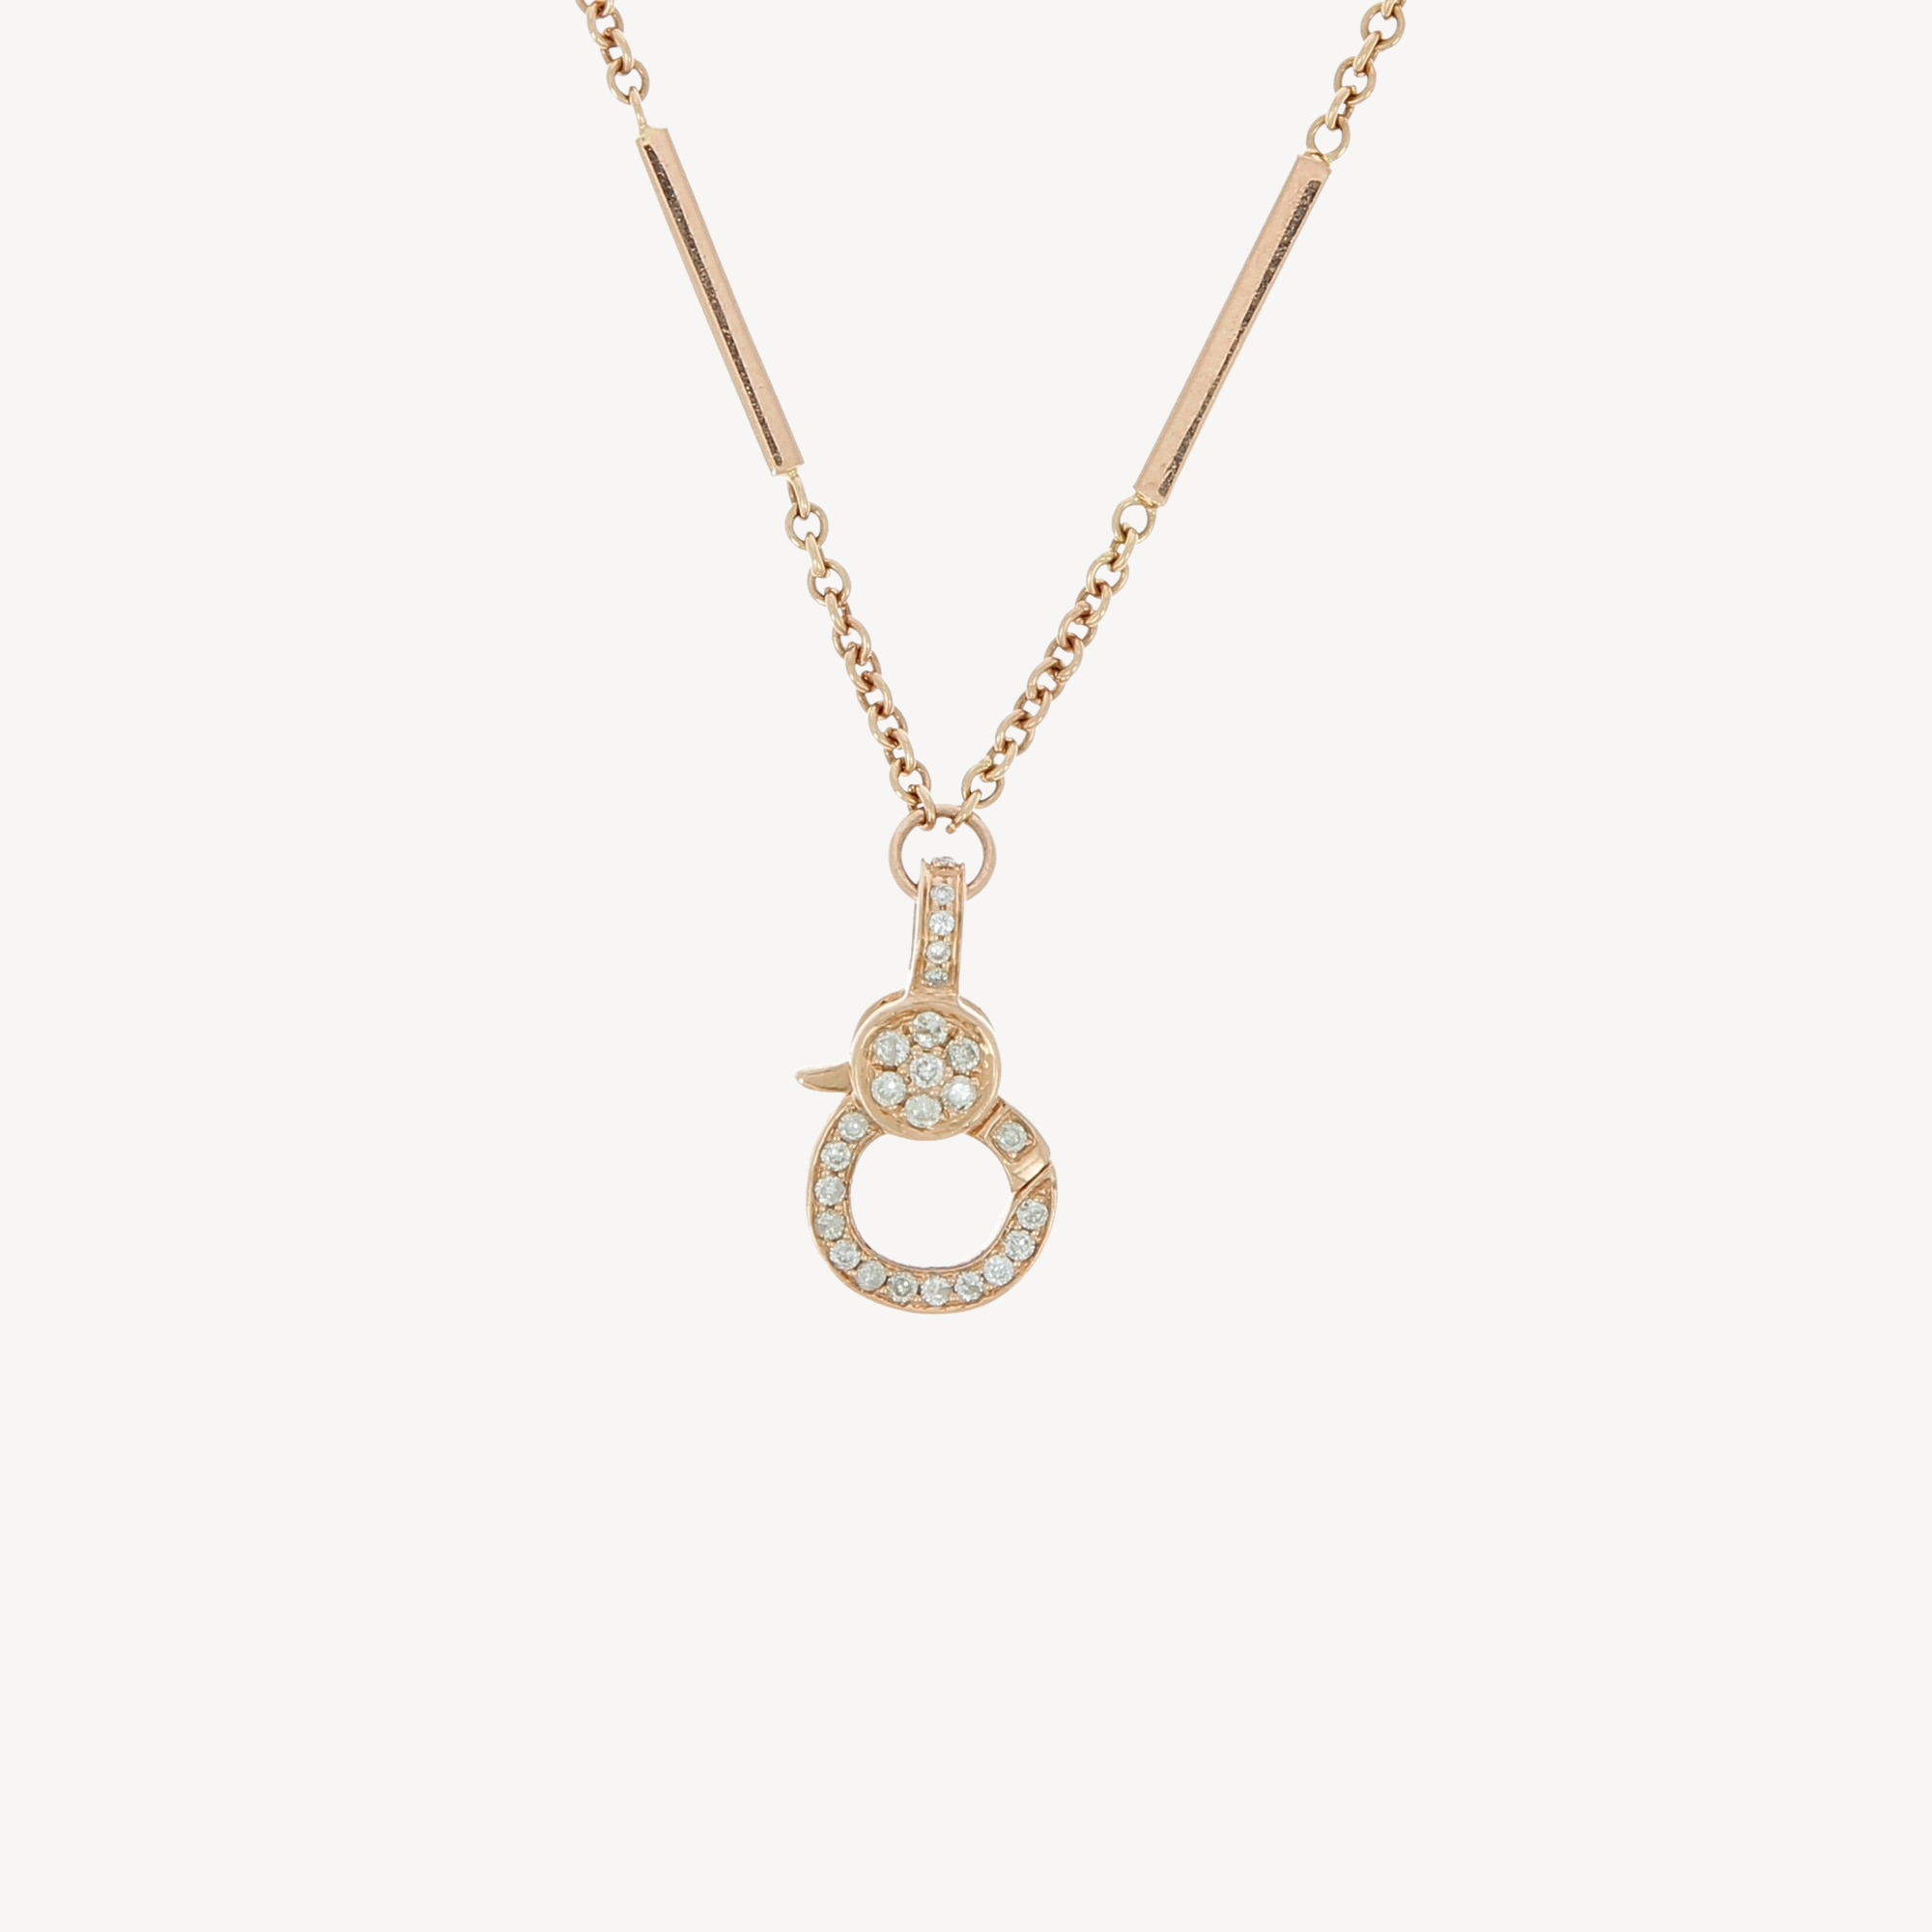 6 Links Mother of Pearl Rose Gold Necklace